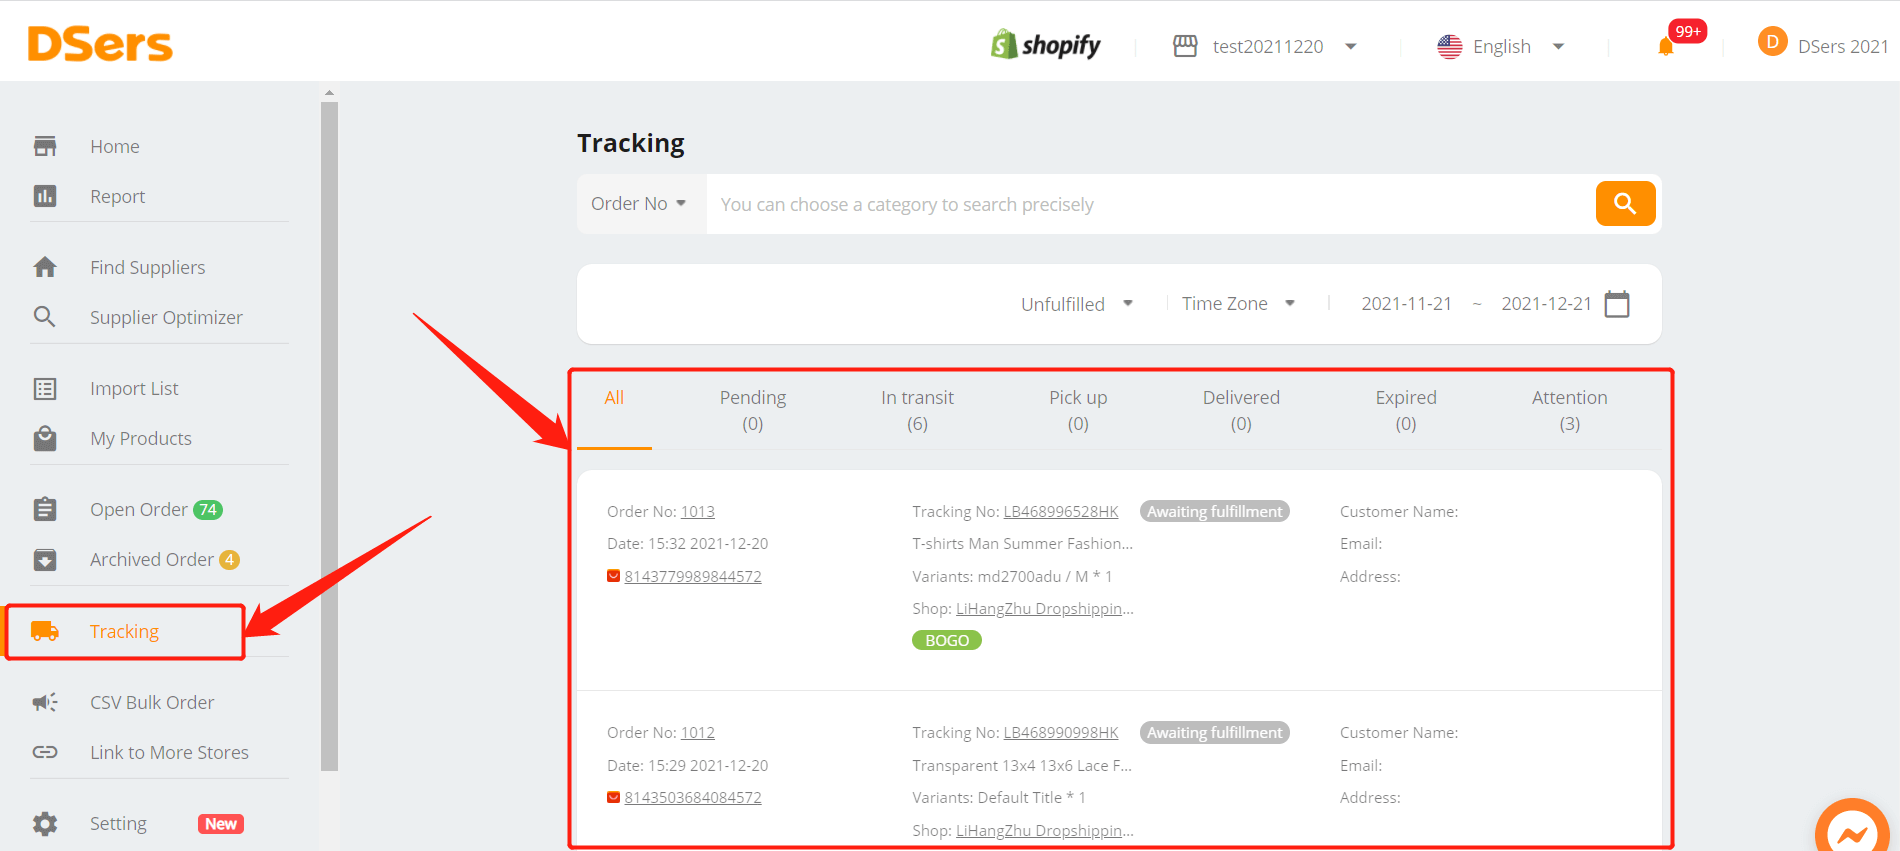 Track your orders 1 - DSers